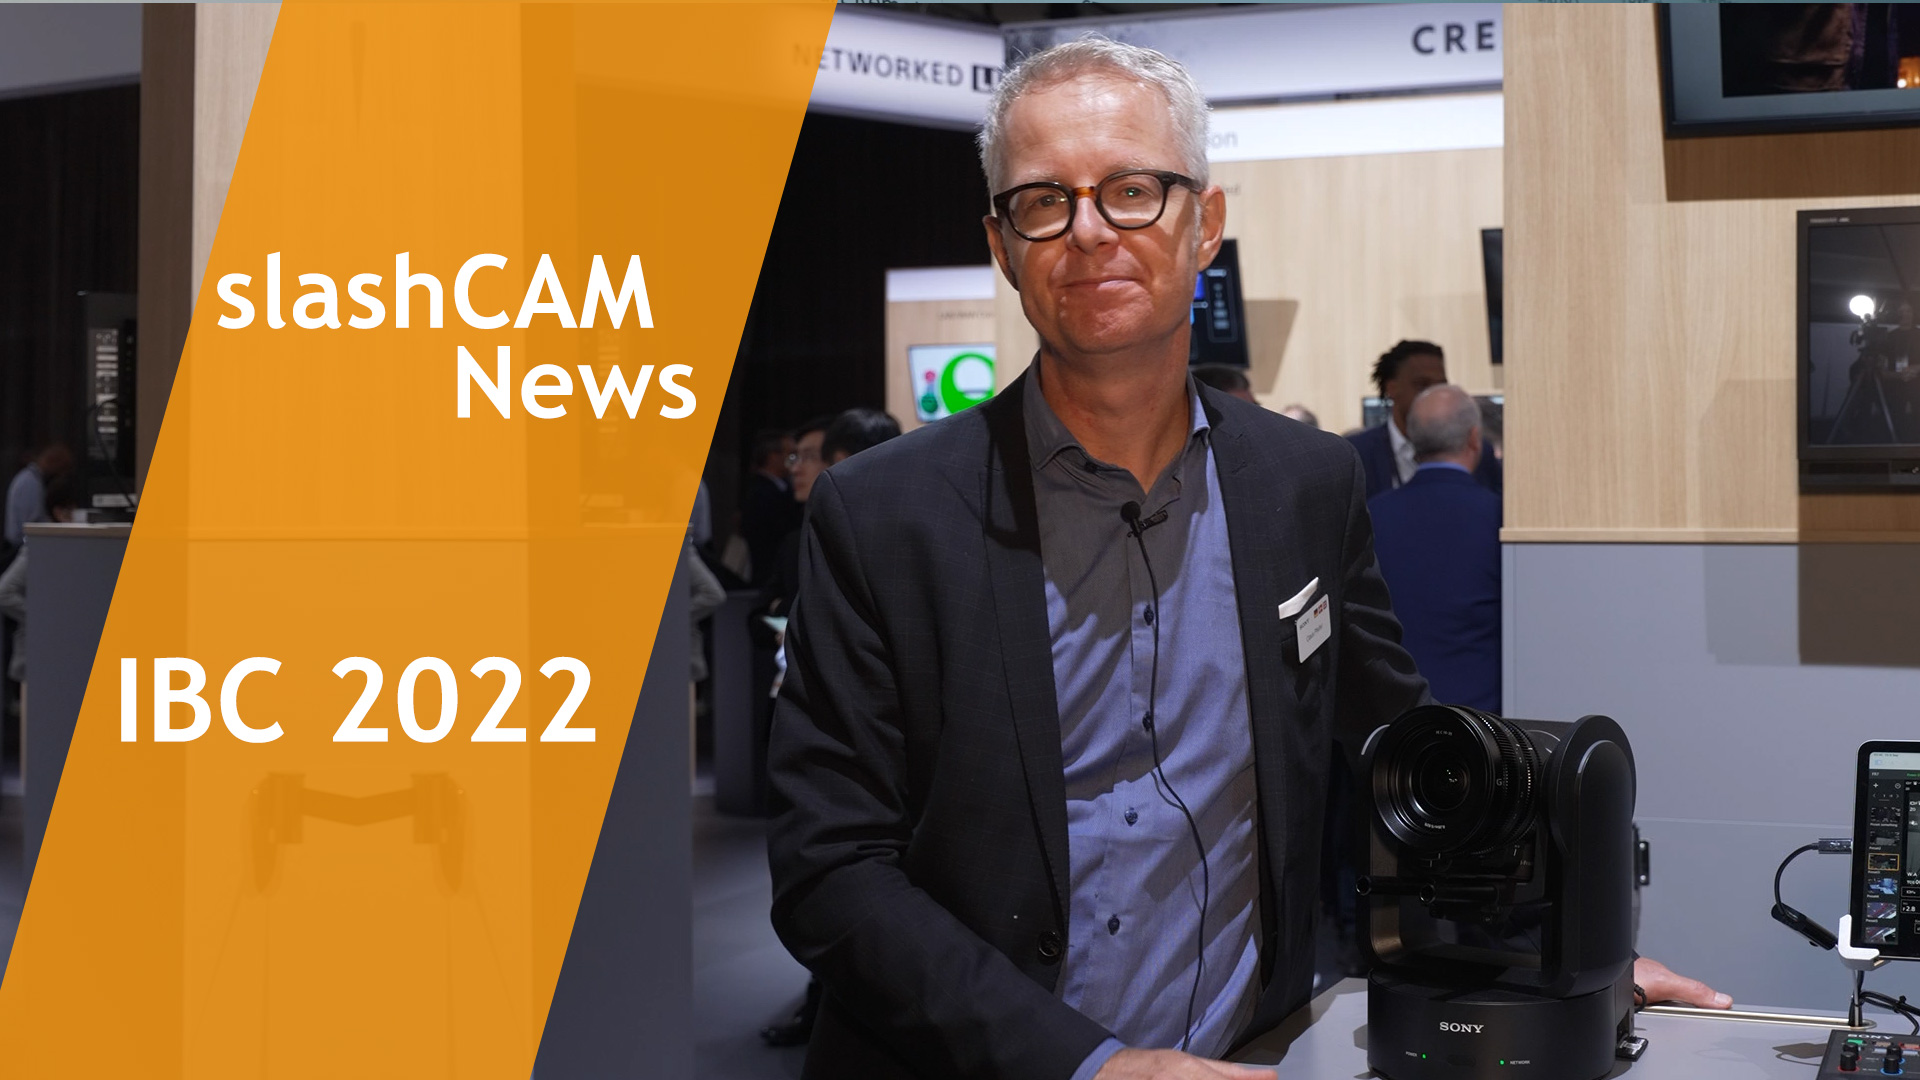 IBC 2022: Sony's new FR7 full-frame PTZ in a slashCAM video overview